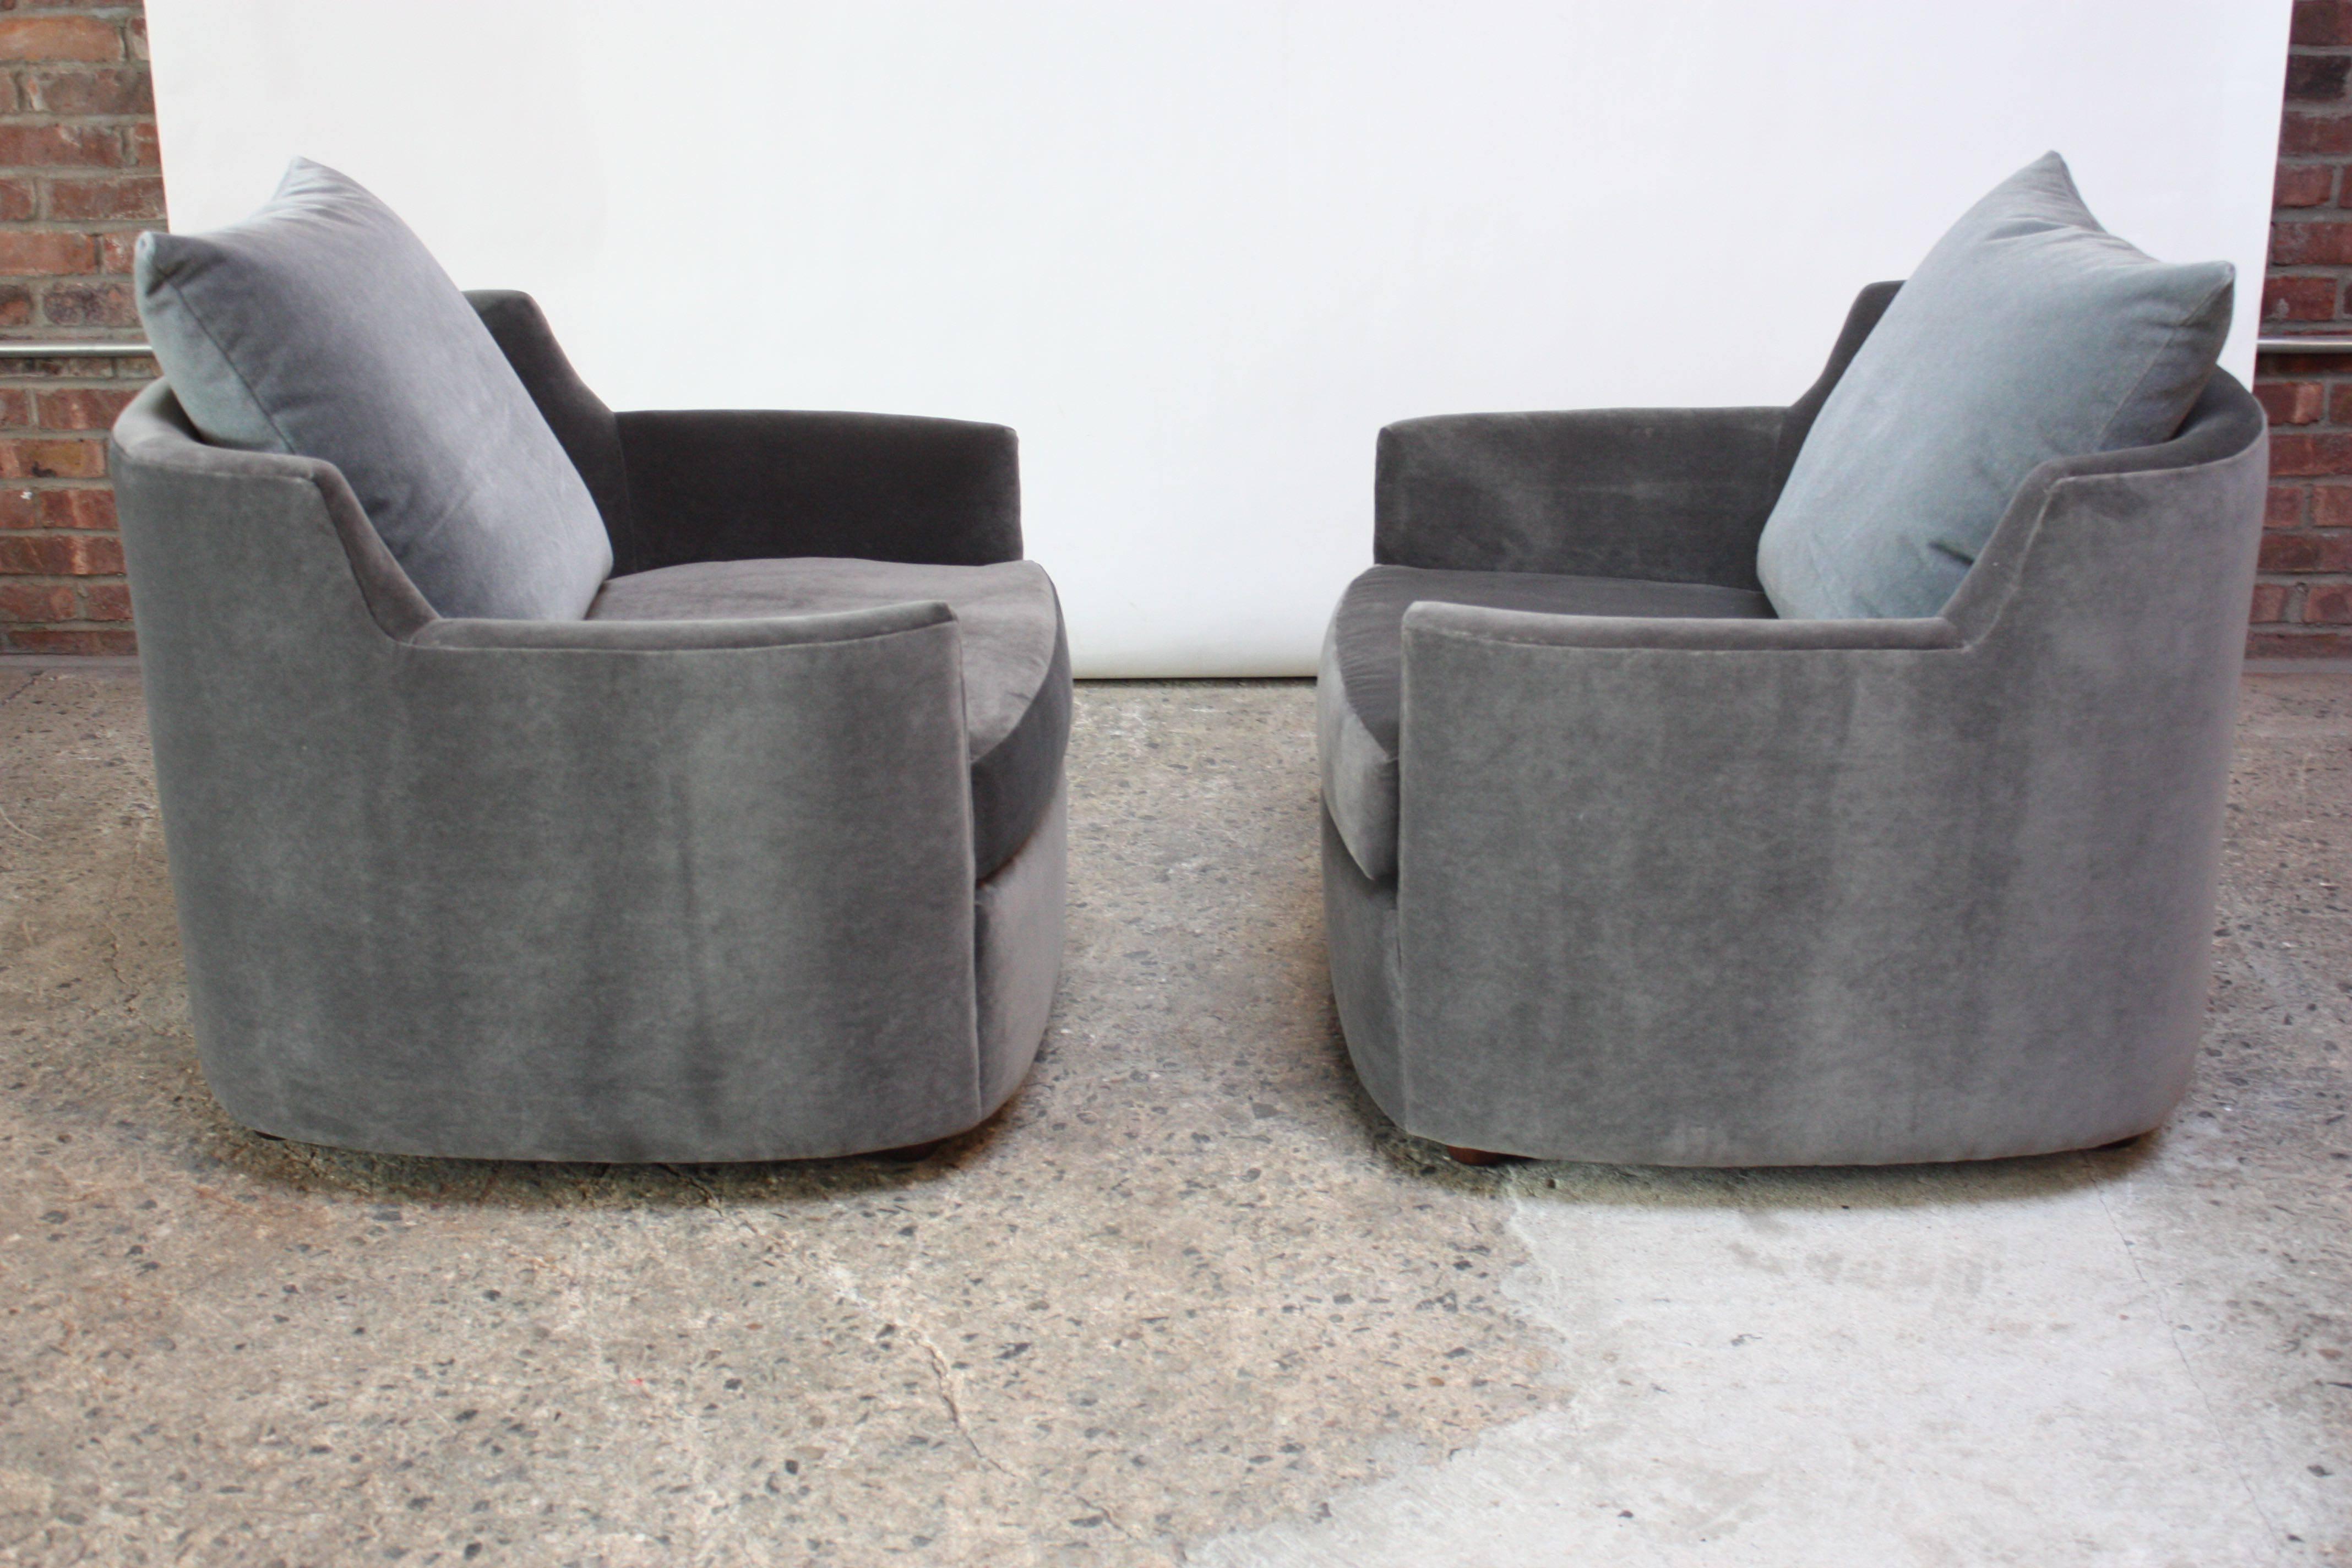 Pair of Barrel-back chairs composed of 'block' stained mahogany feet and newly upholstered frame in Kravet 'gun-metal gray' velvet with a pale blue mohair back cushion (originally, the chairs did not have a back cushion; we had these made for these